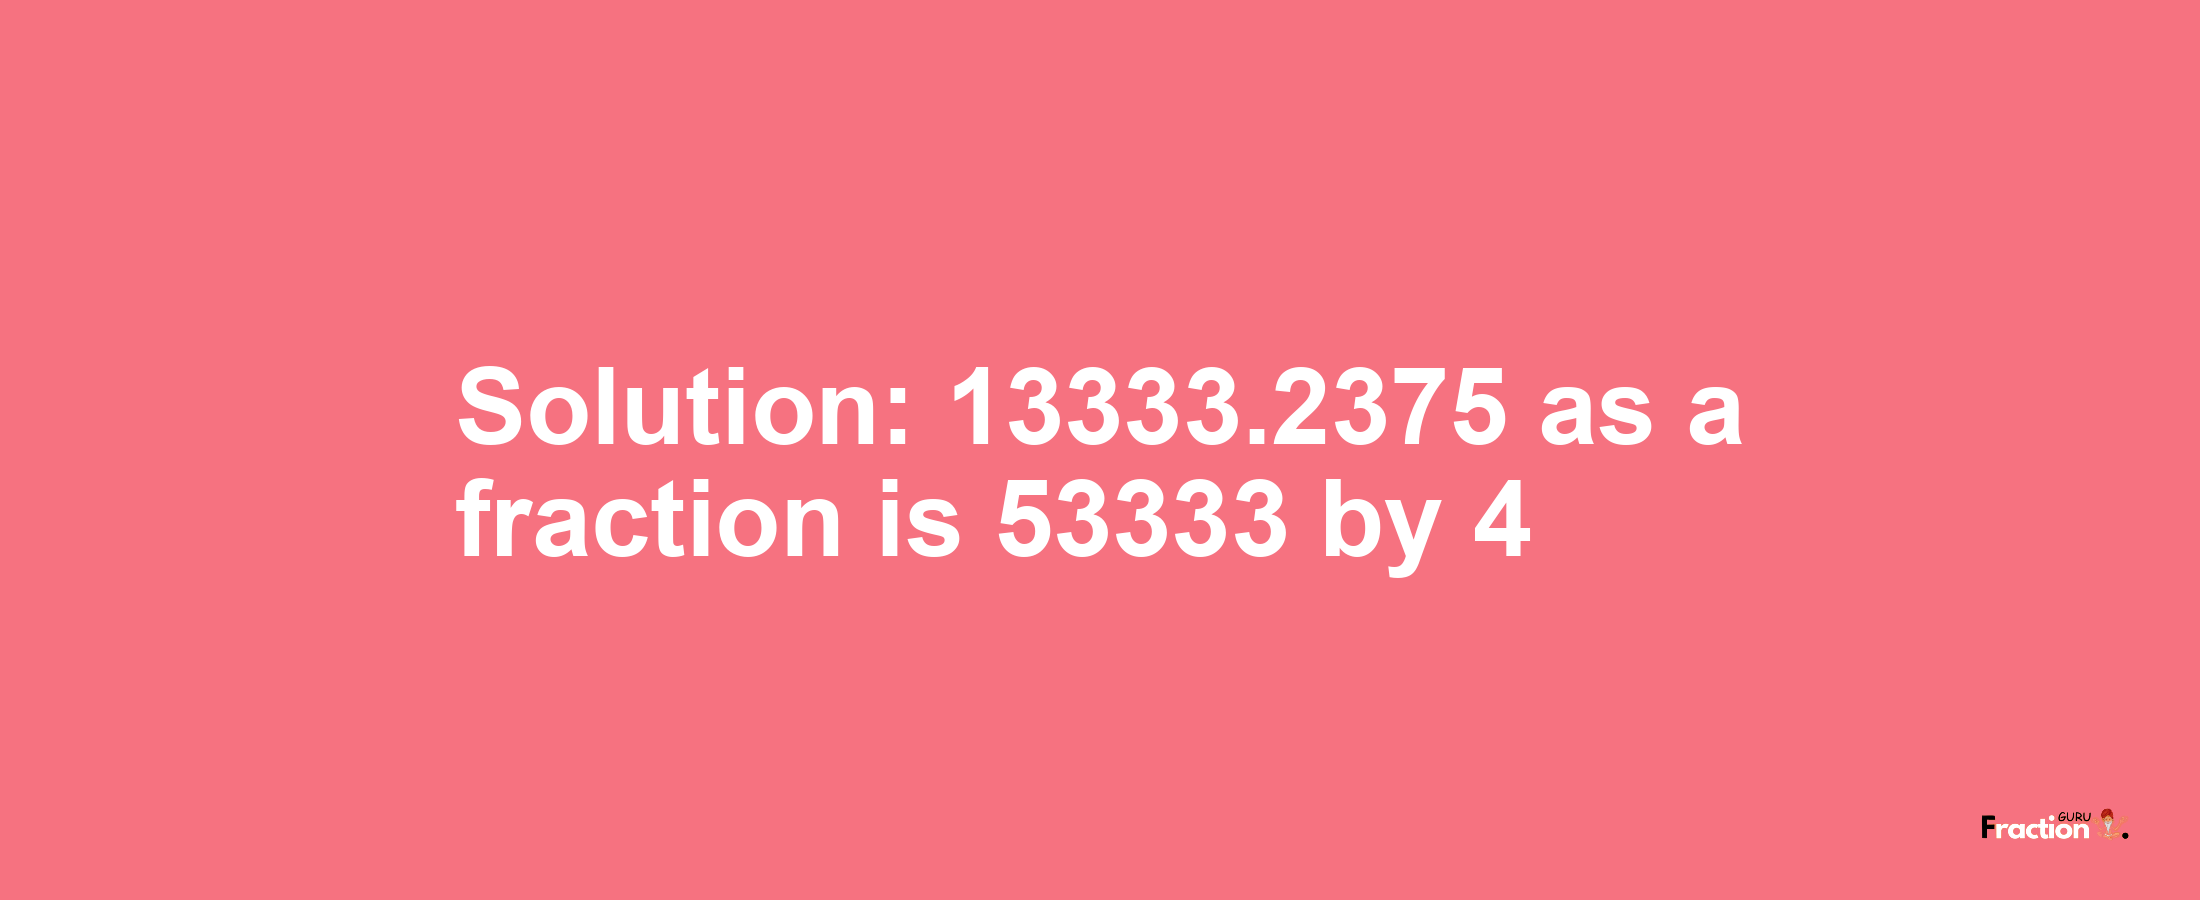 Solution:13333.2375 as a fraction is 53333/4